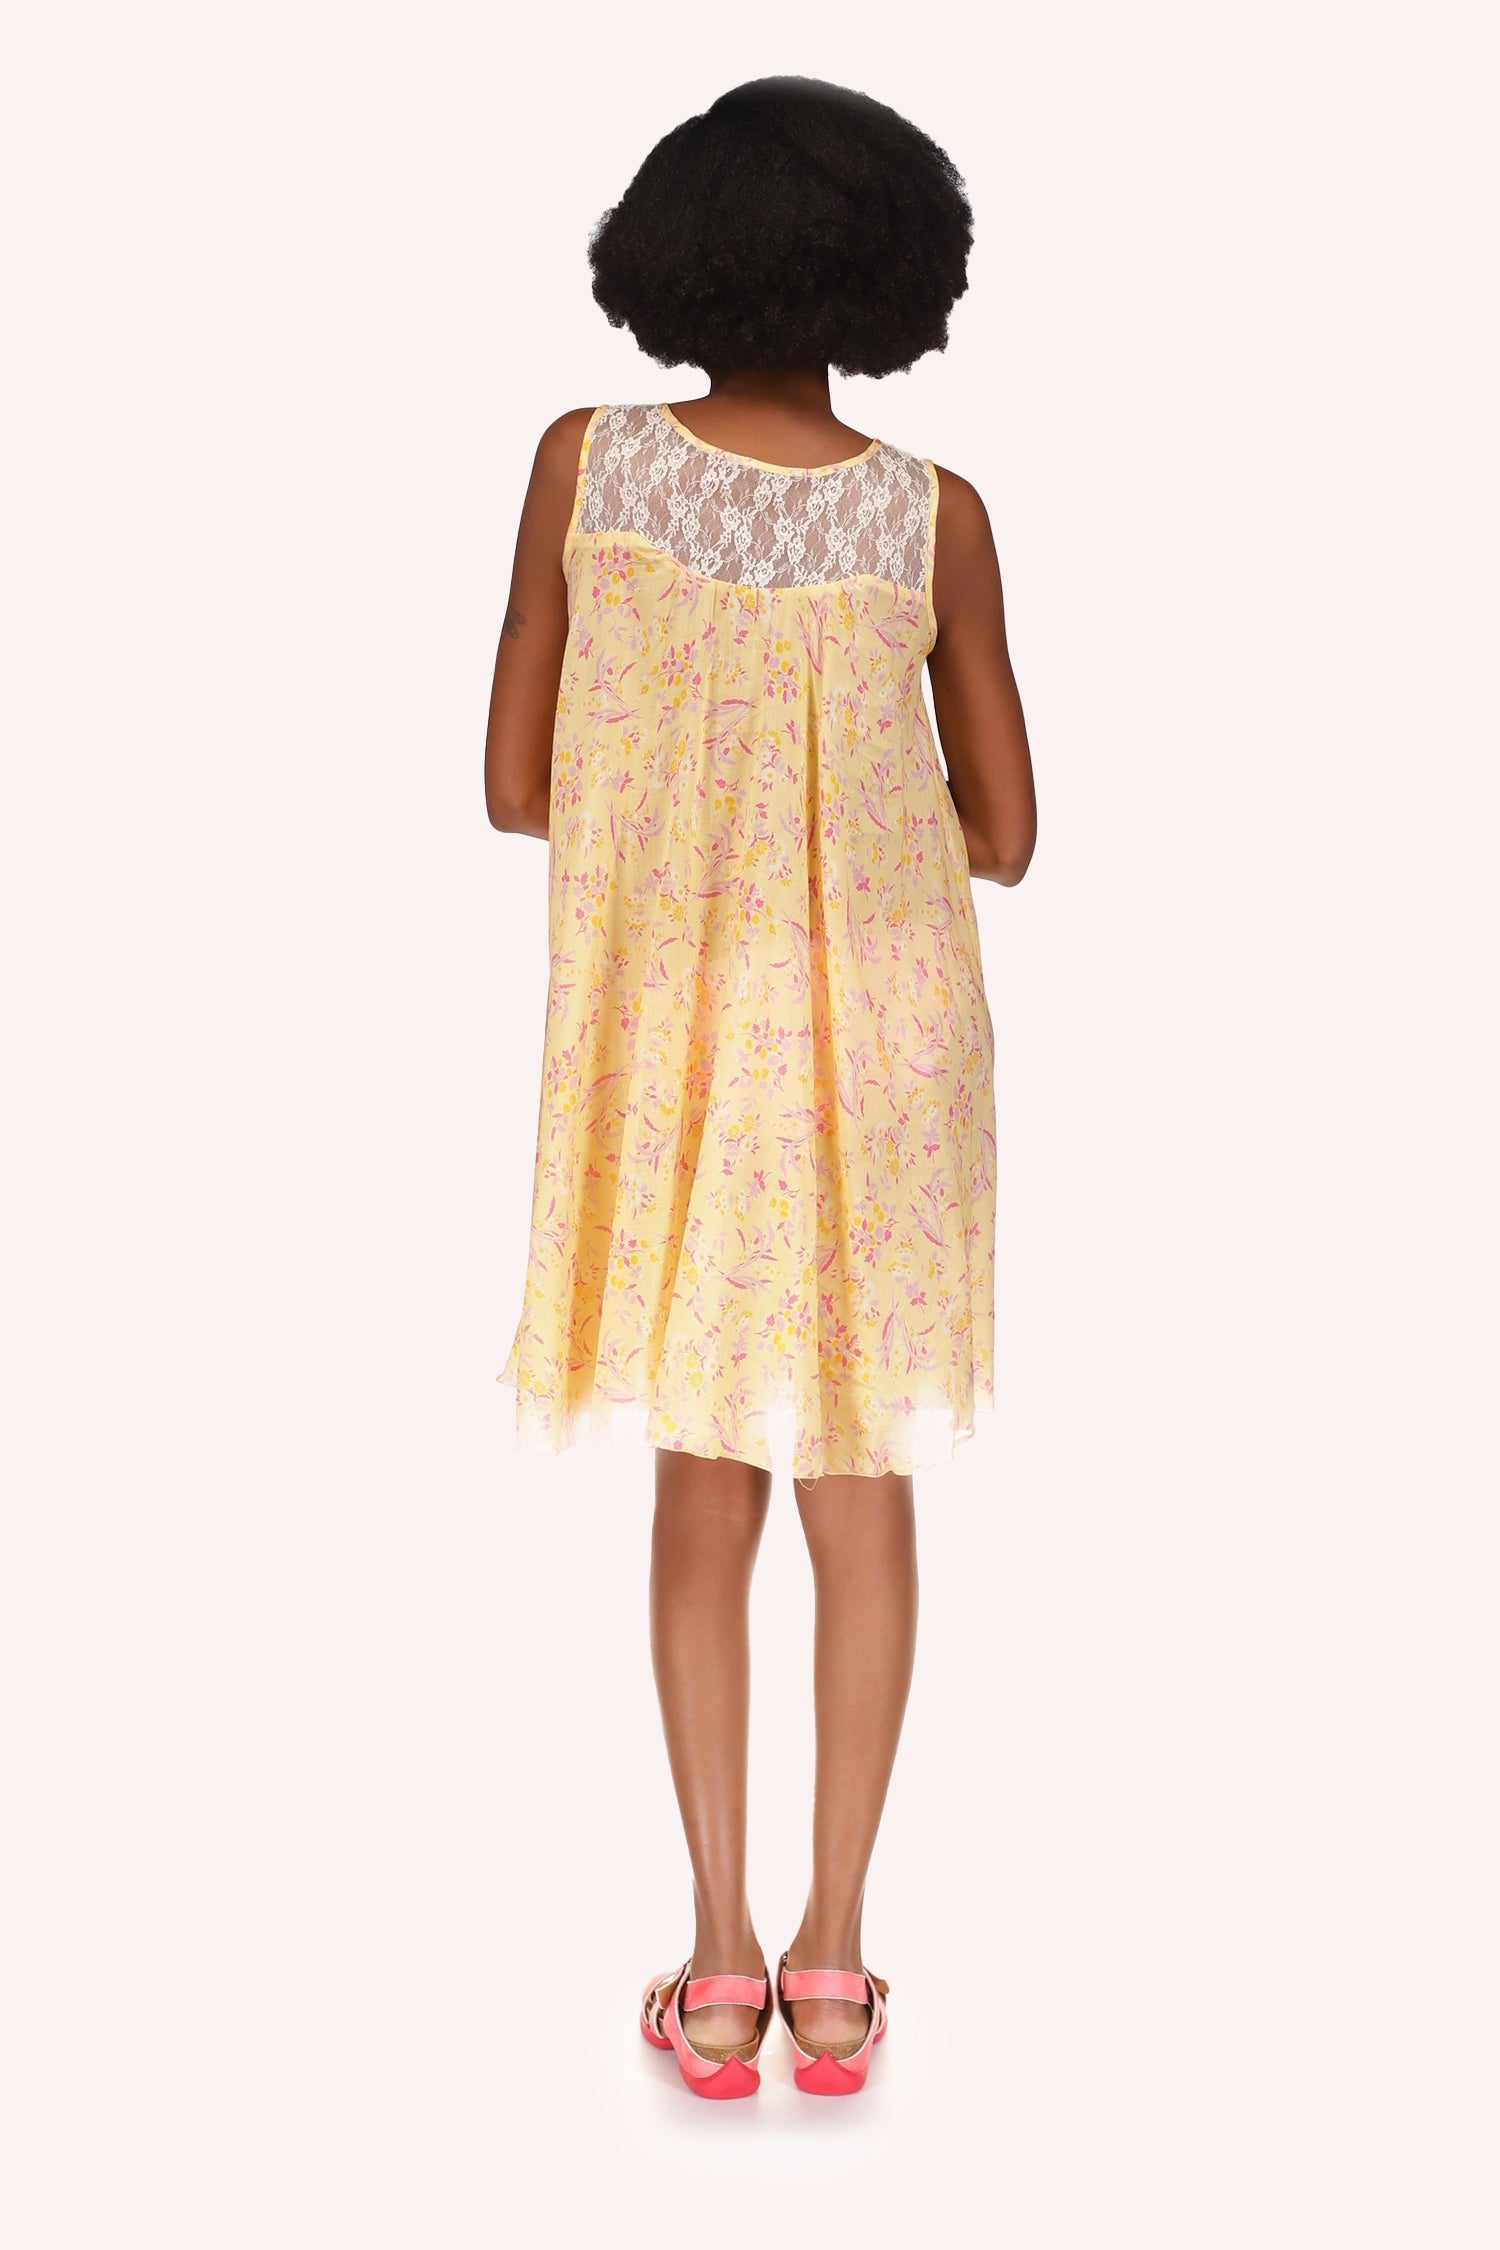 Arcadia Blossom Dress, yellow with red spots, white lace on top back and over shoulders